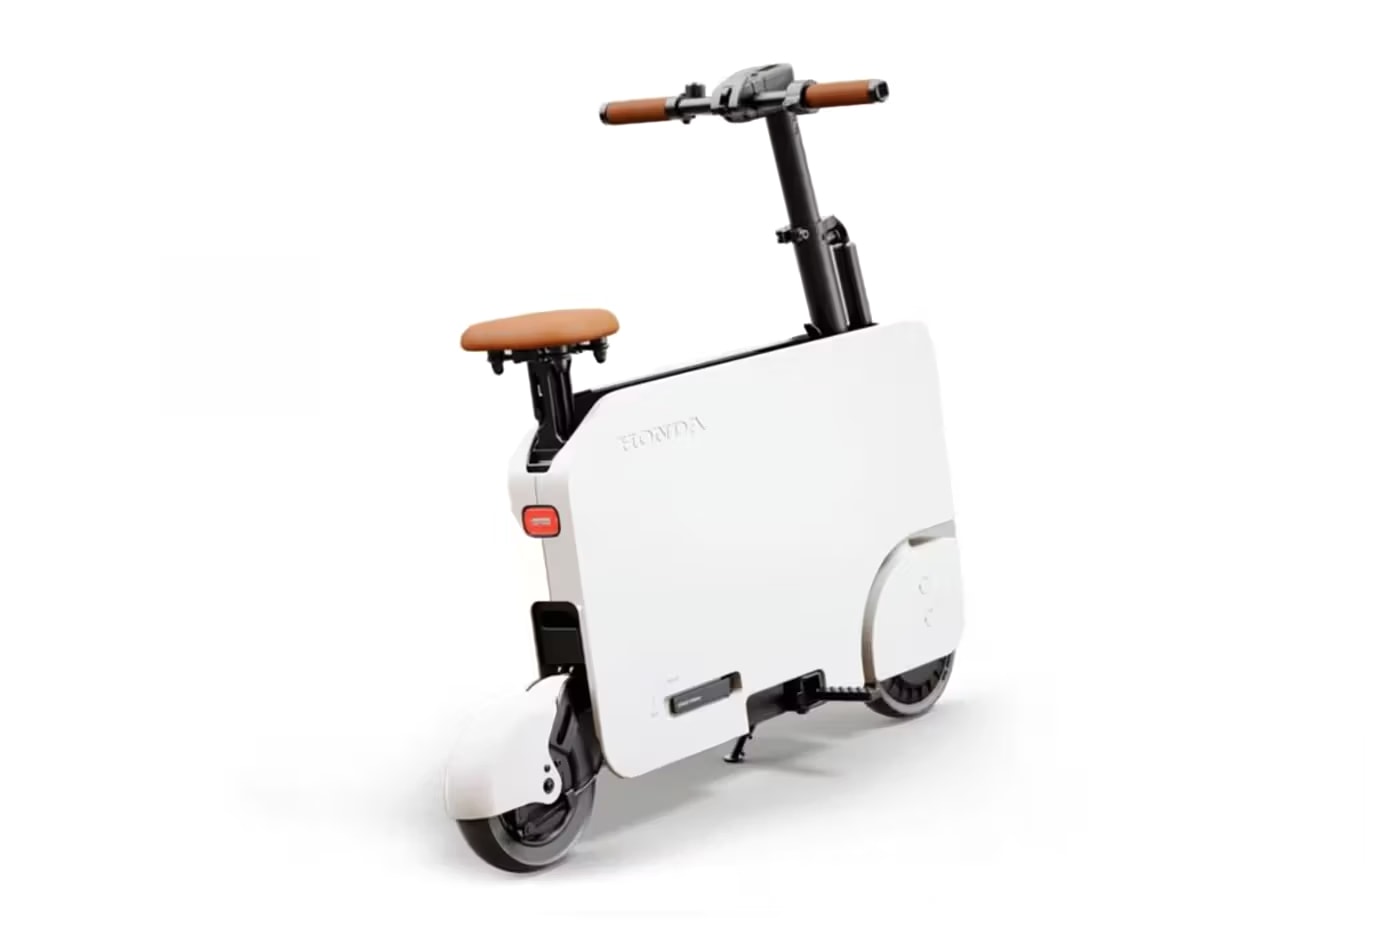 Check out Honda's compact new e-scooter